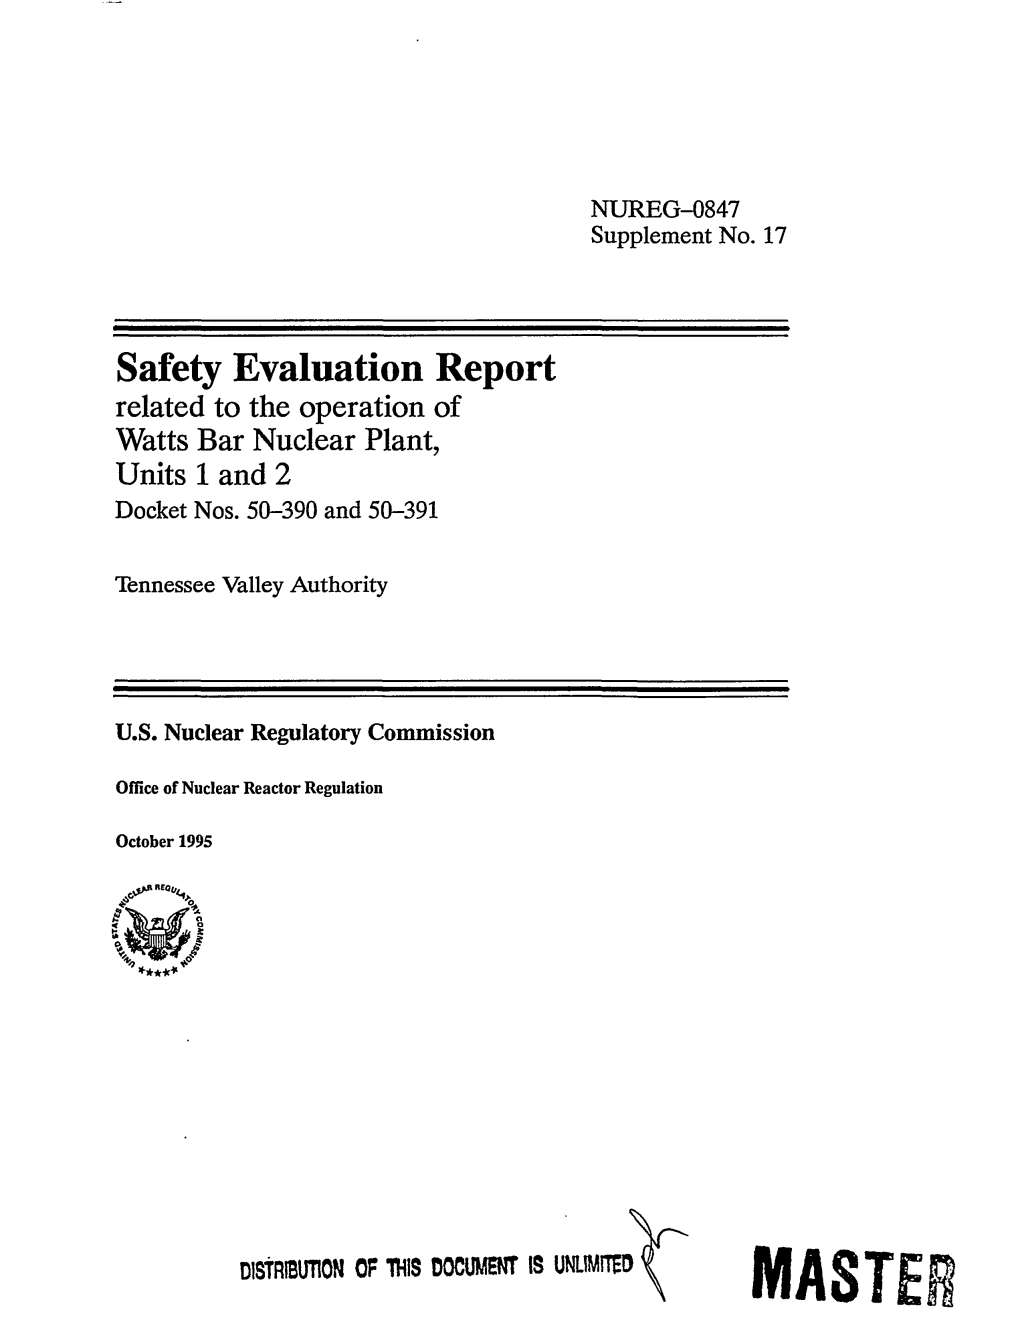 Safety Evaluation Report Related to the Operation of Watts Bar Nuclear Plant, Units 1 and 2